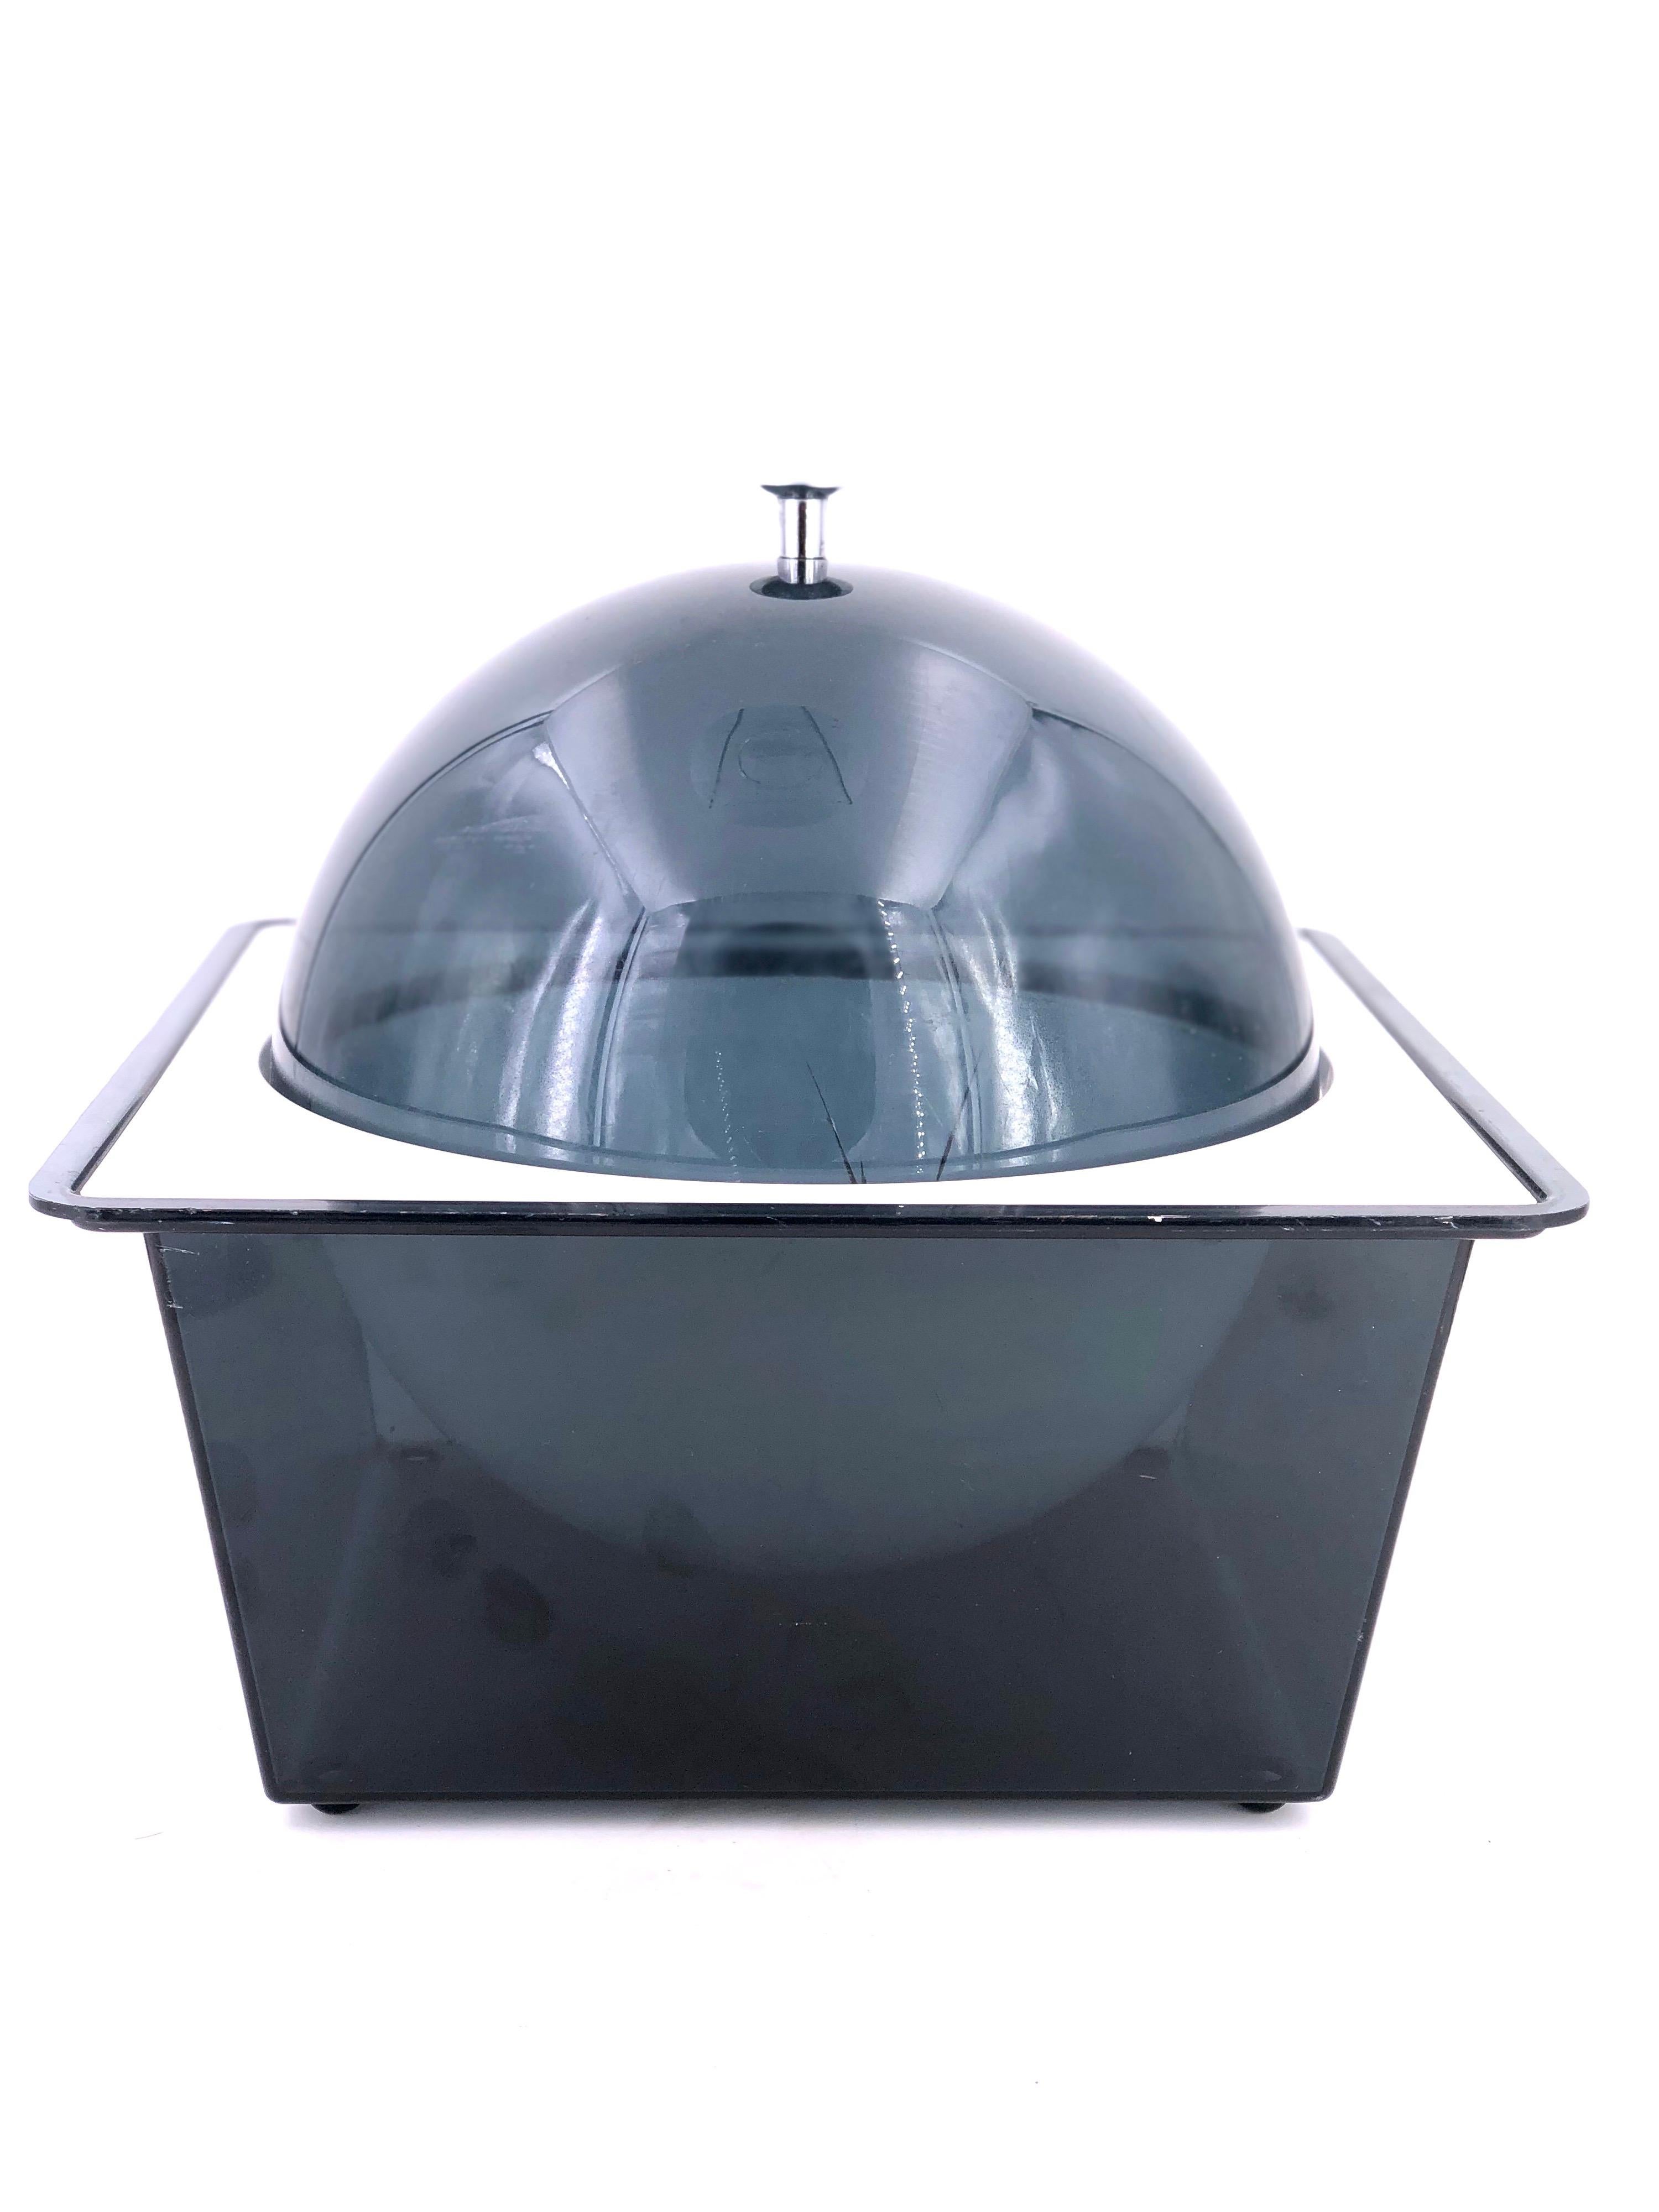 Beautiful and unique space-age dome ice bucket, with white plastic removable insert for easy cleaning.